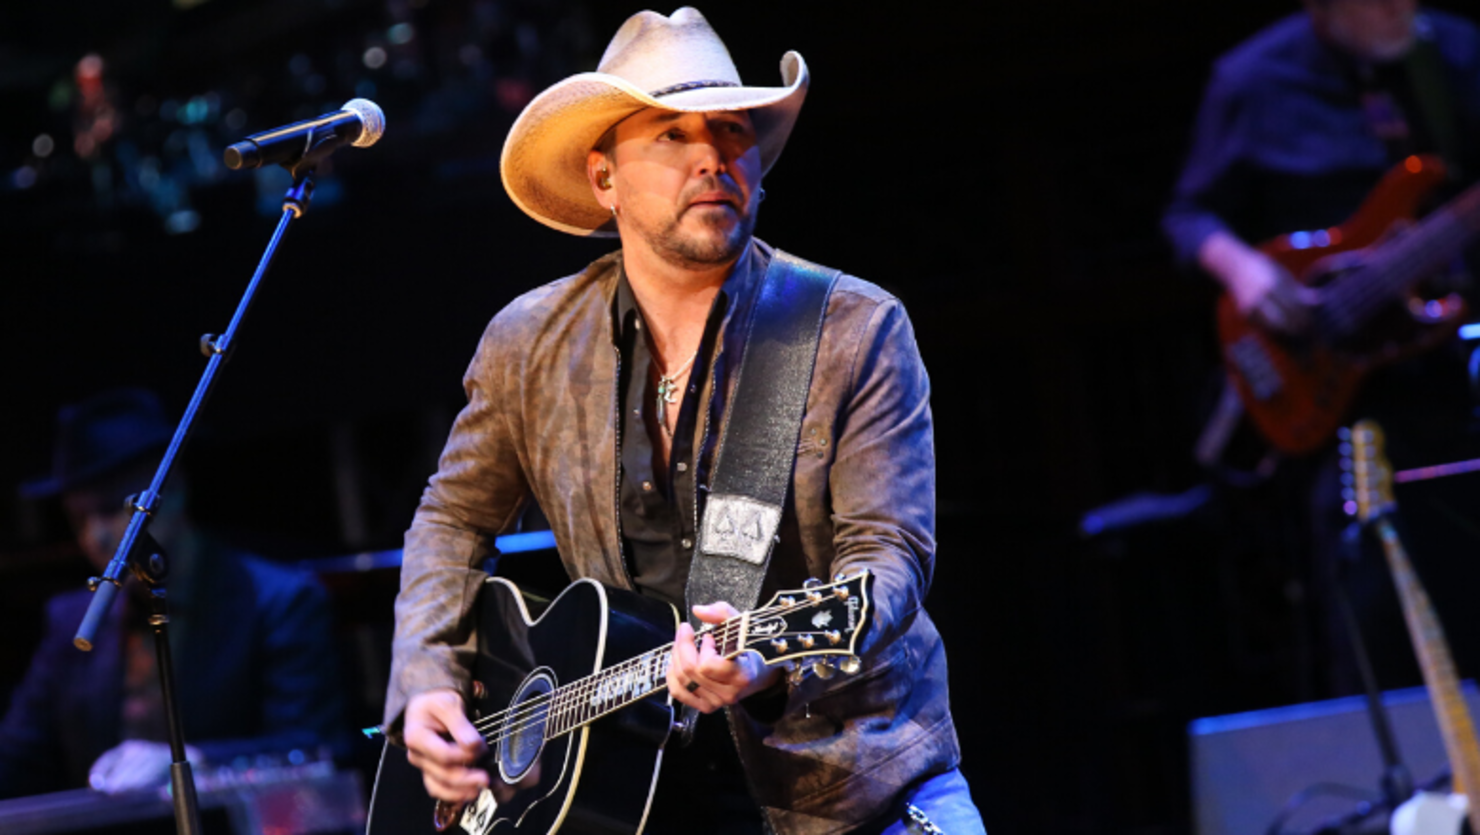 Jason Aldean Drops New Song 'Camouflage Hat' Off Upcoming Album